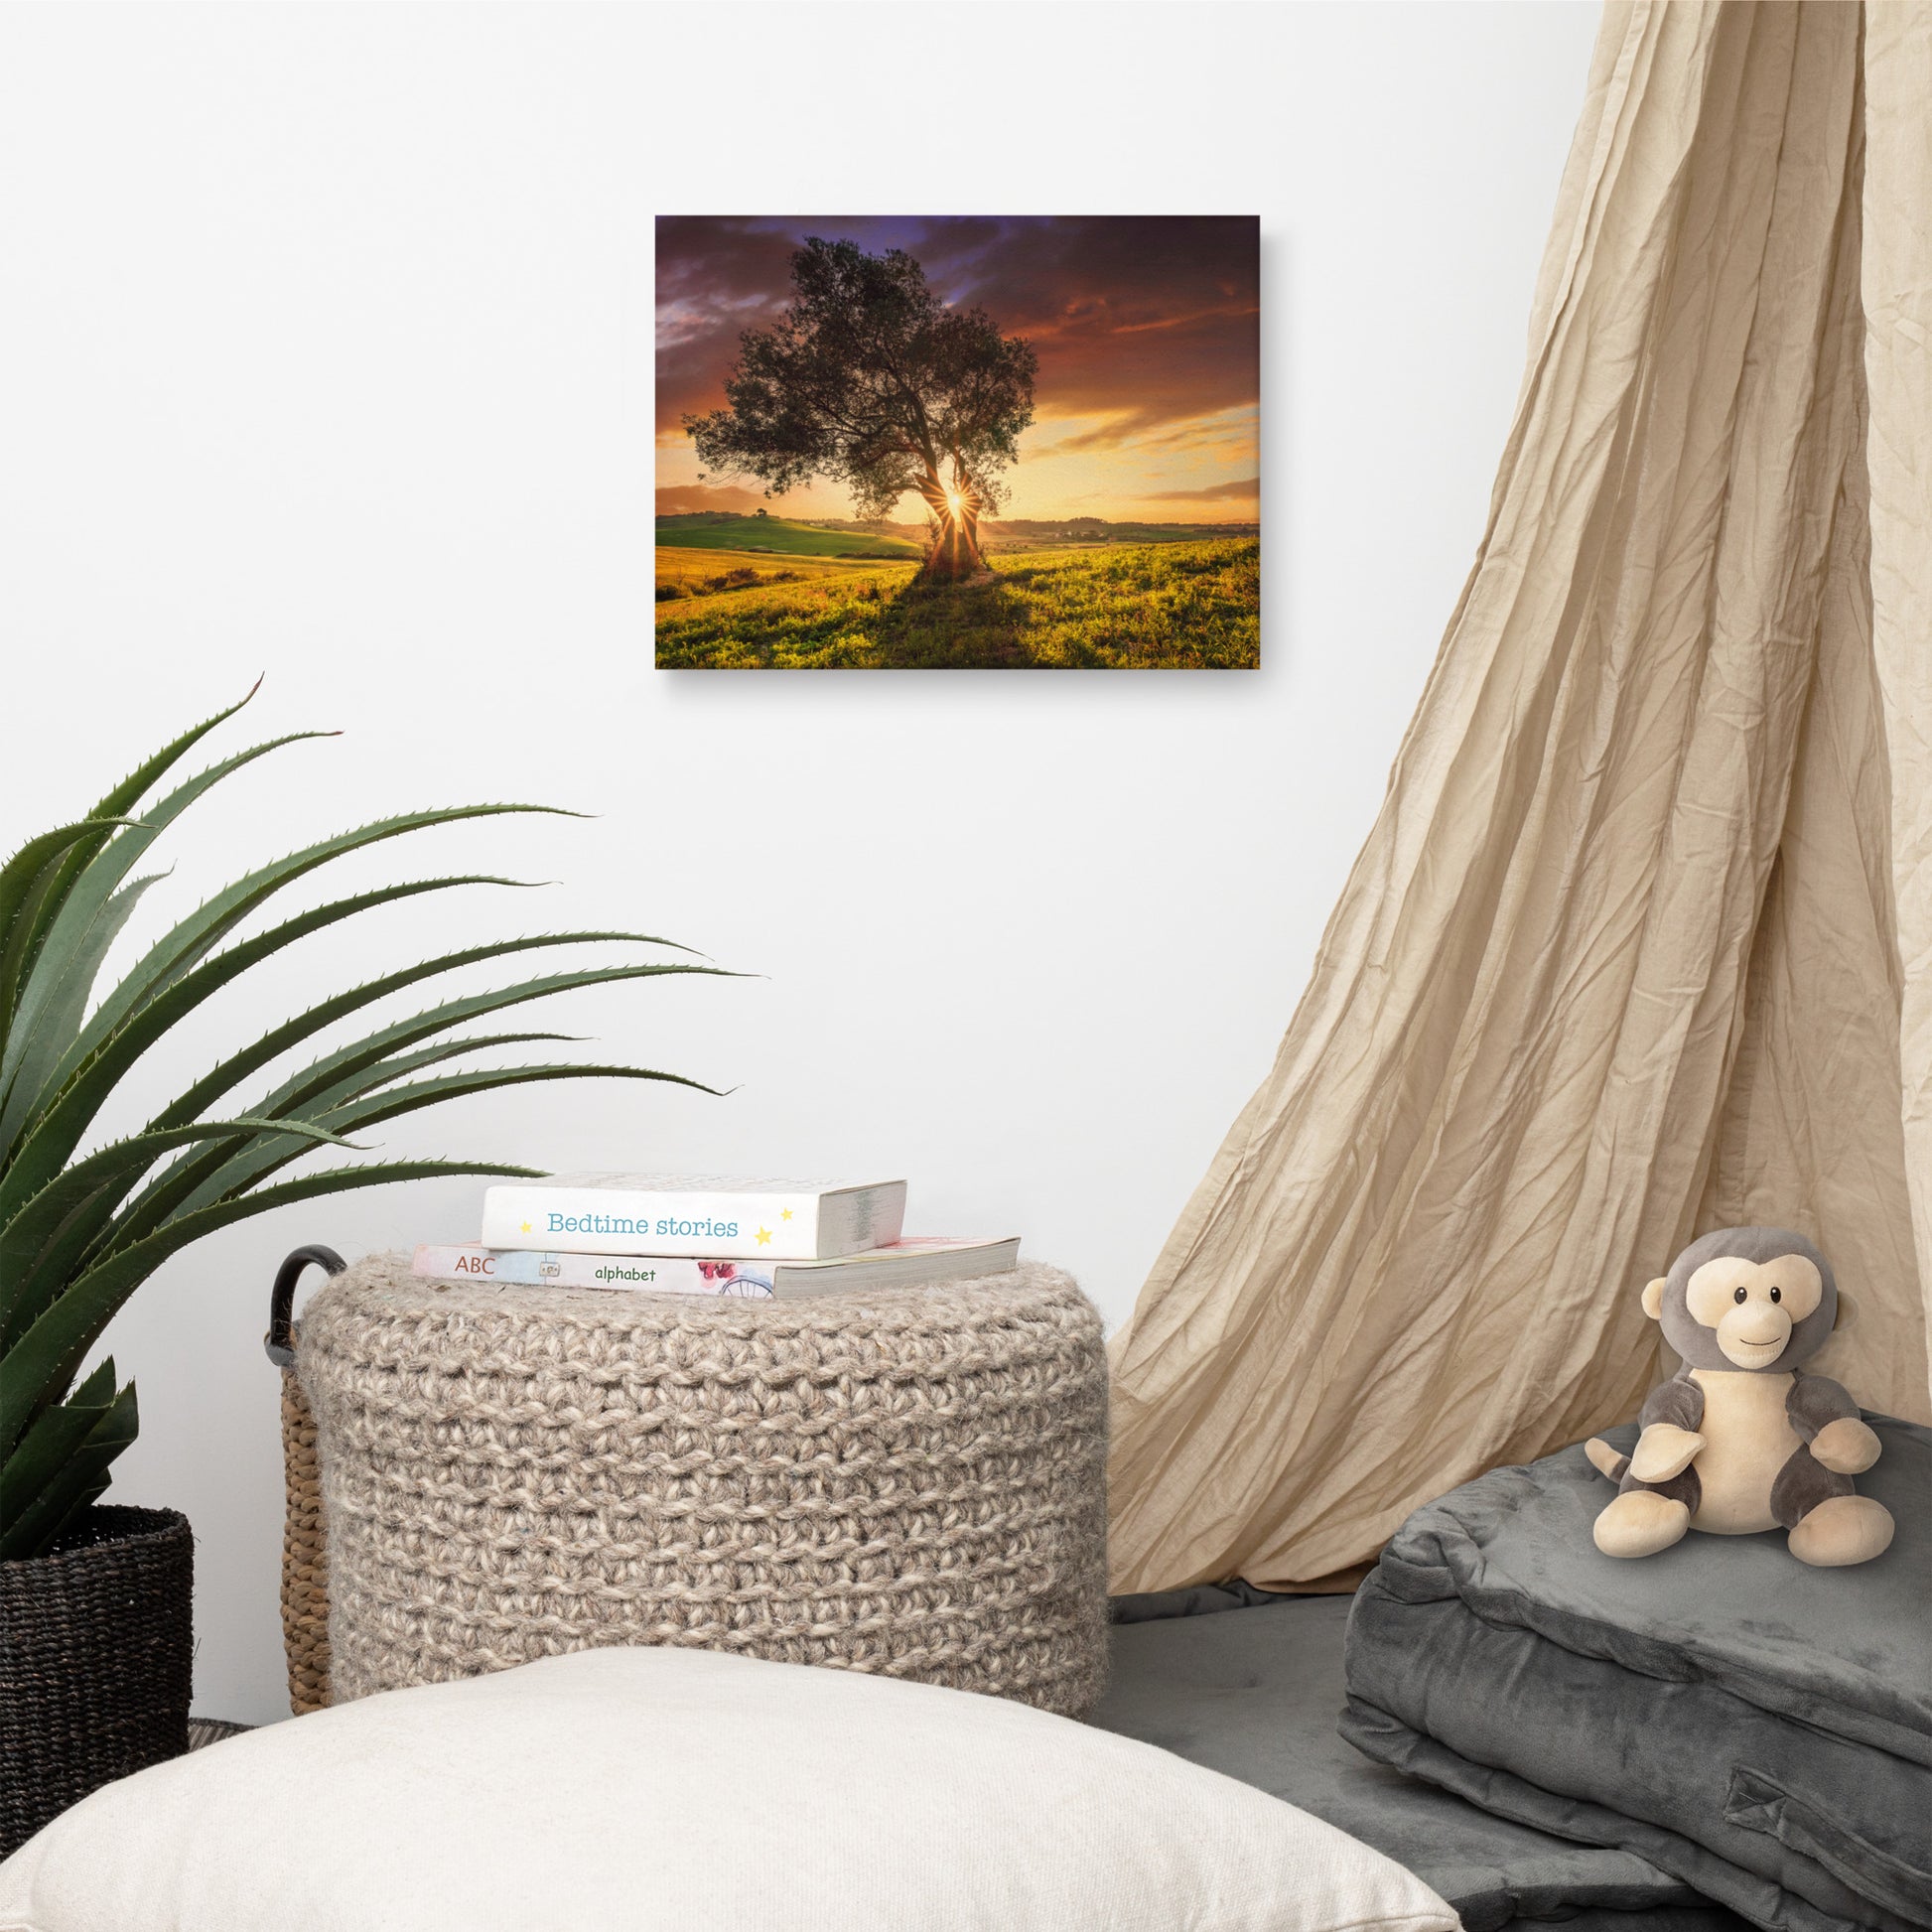 Countryside Olive Tree Sunset Landscape Photo Canvas Wall Art Prints